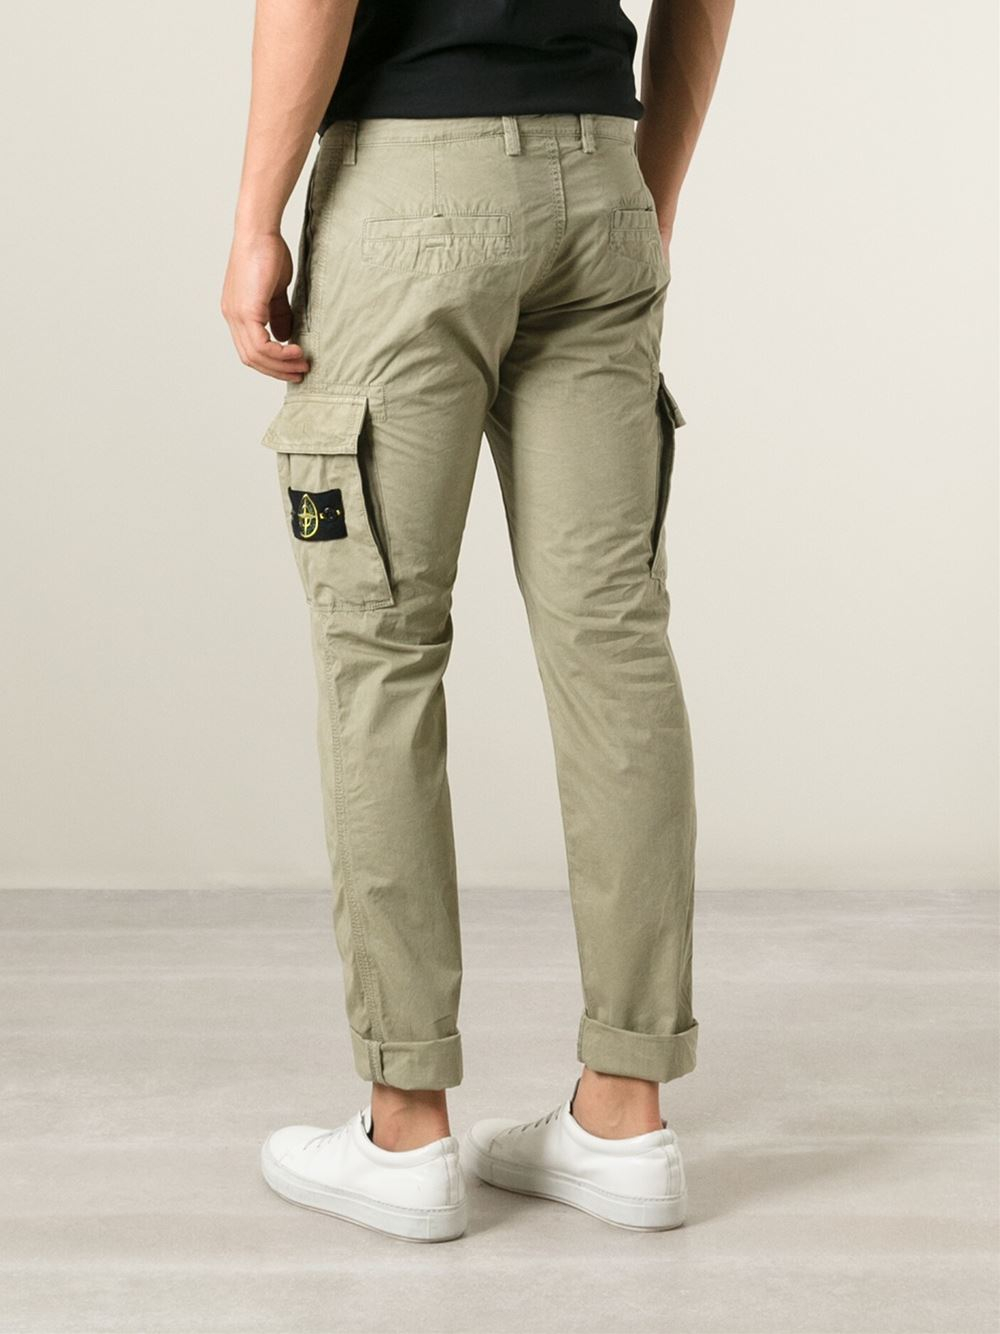 stone-island-beige-cargo-trousers-product-1-27706228-0-586559326-normal.jpeg